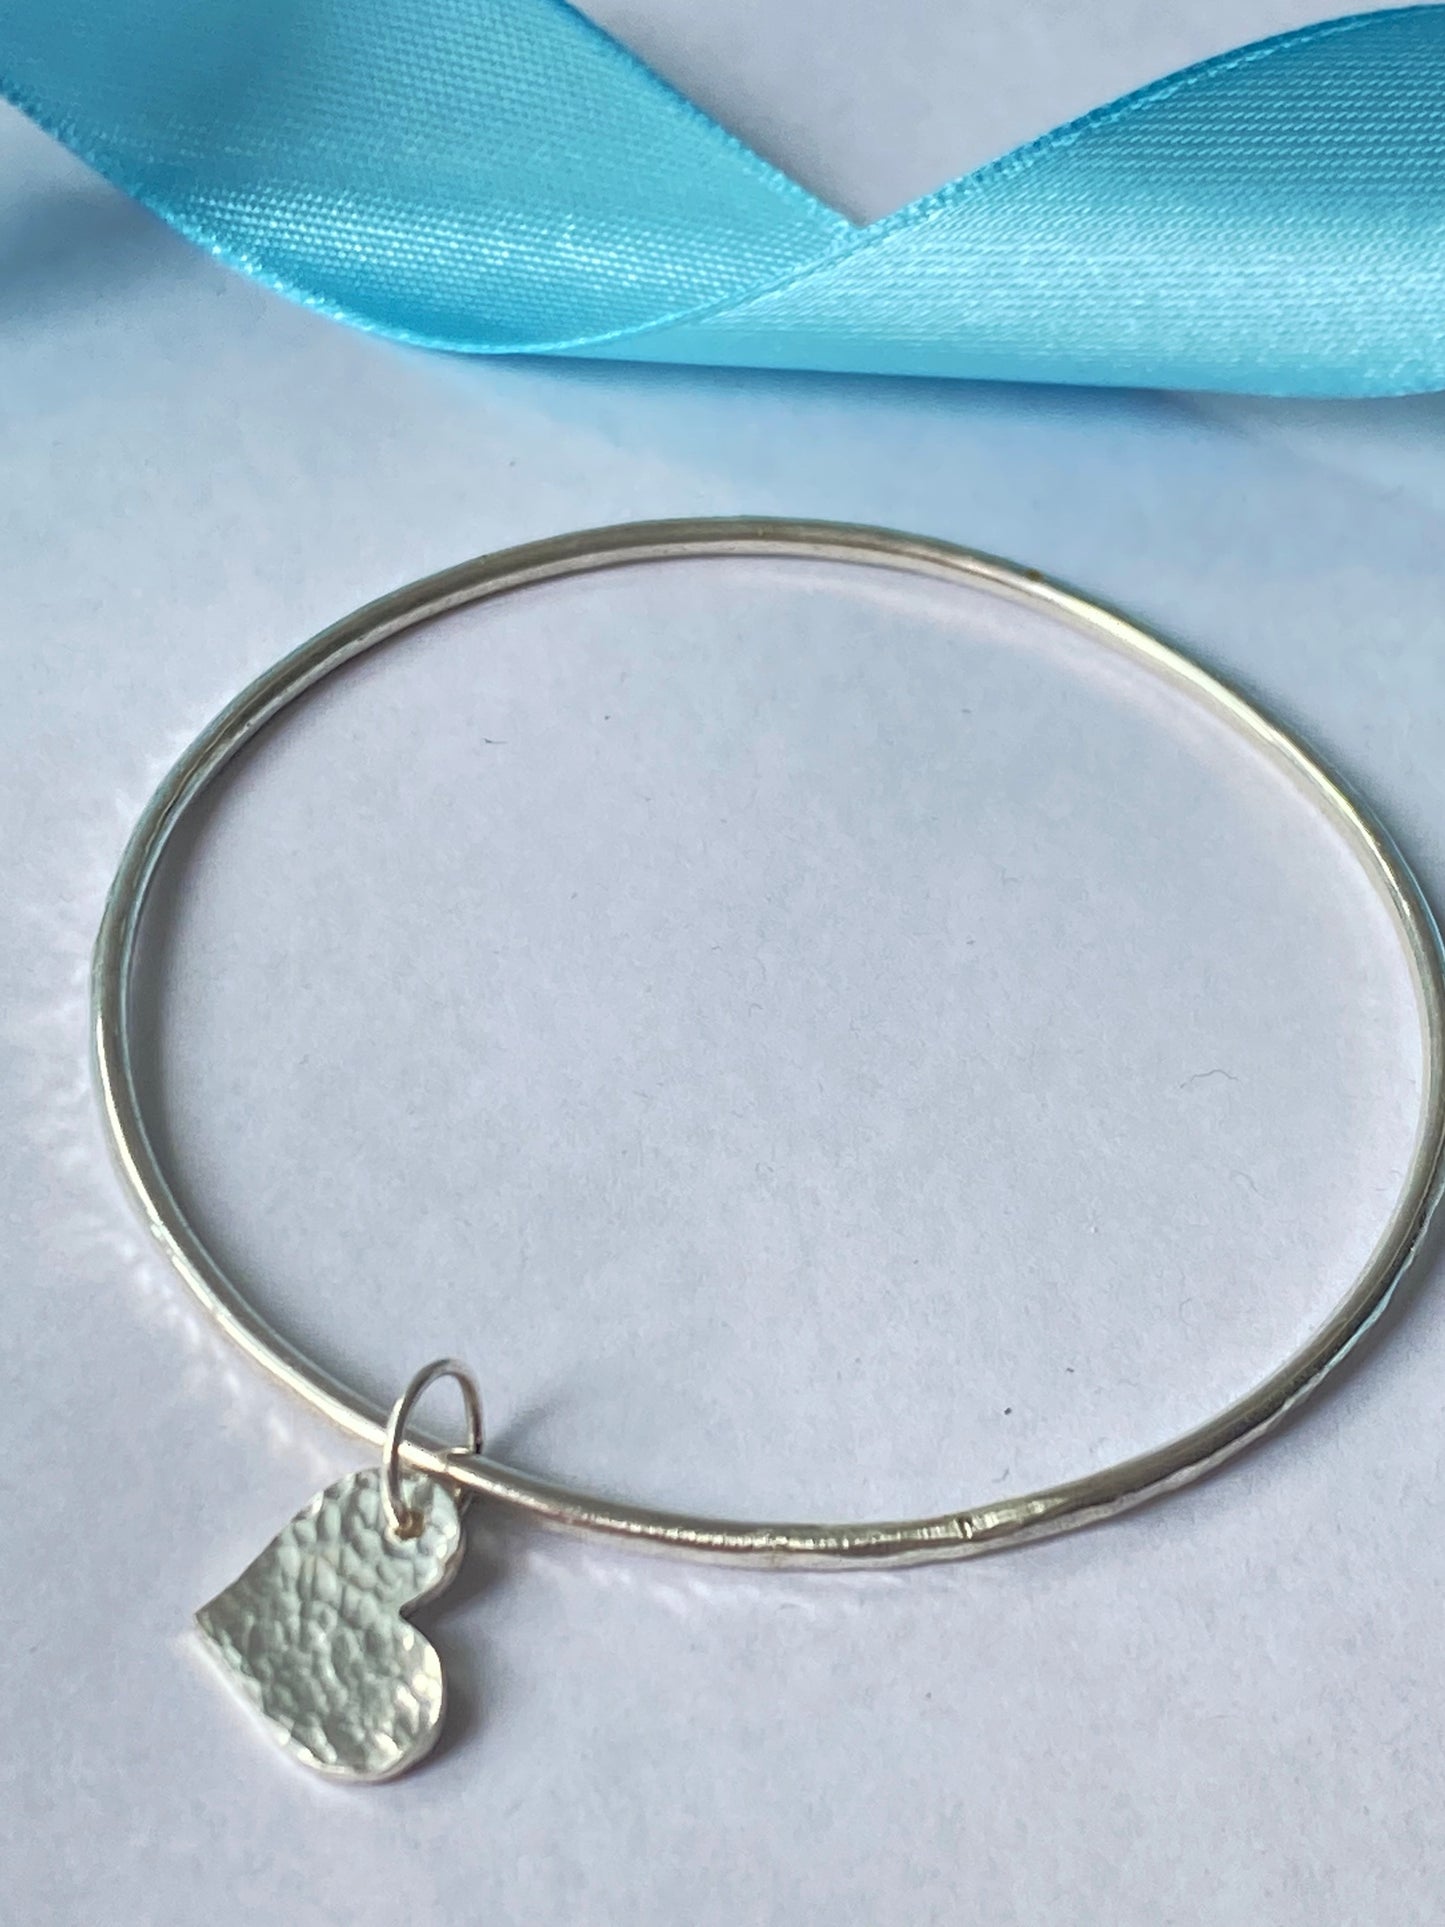 Sterling Silver Heart Charm Bangle